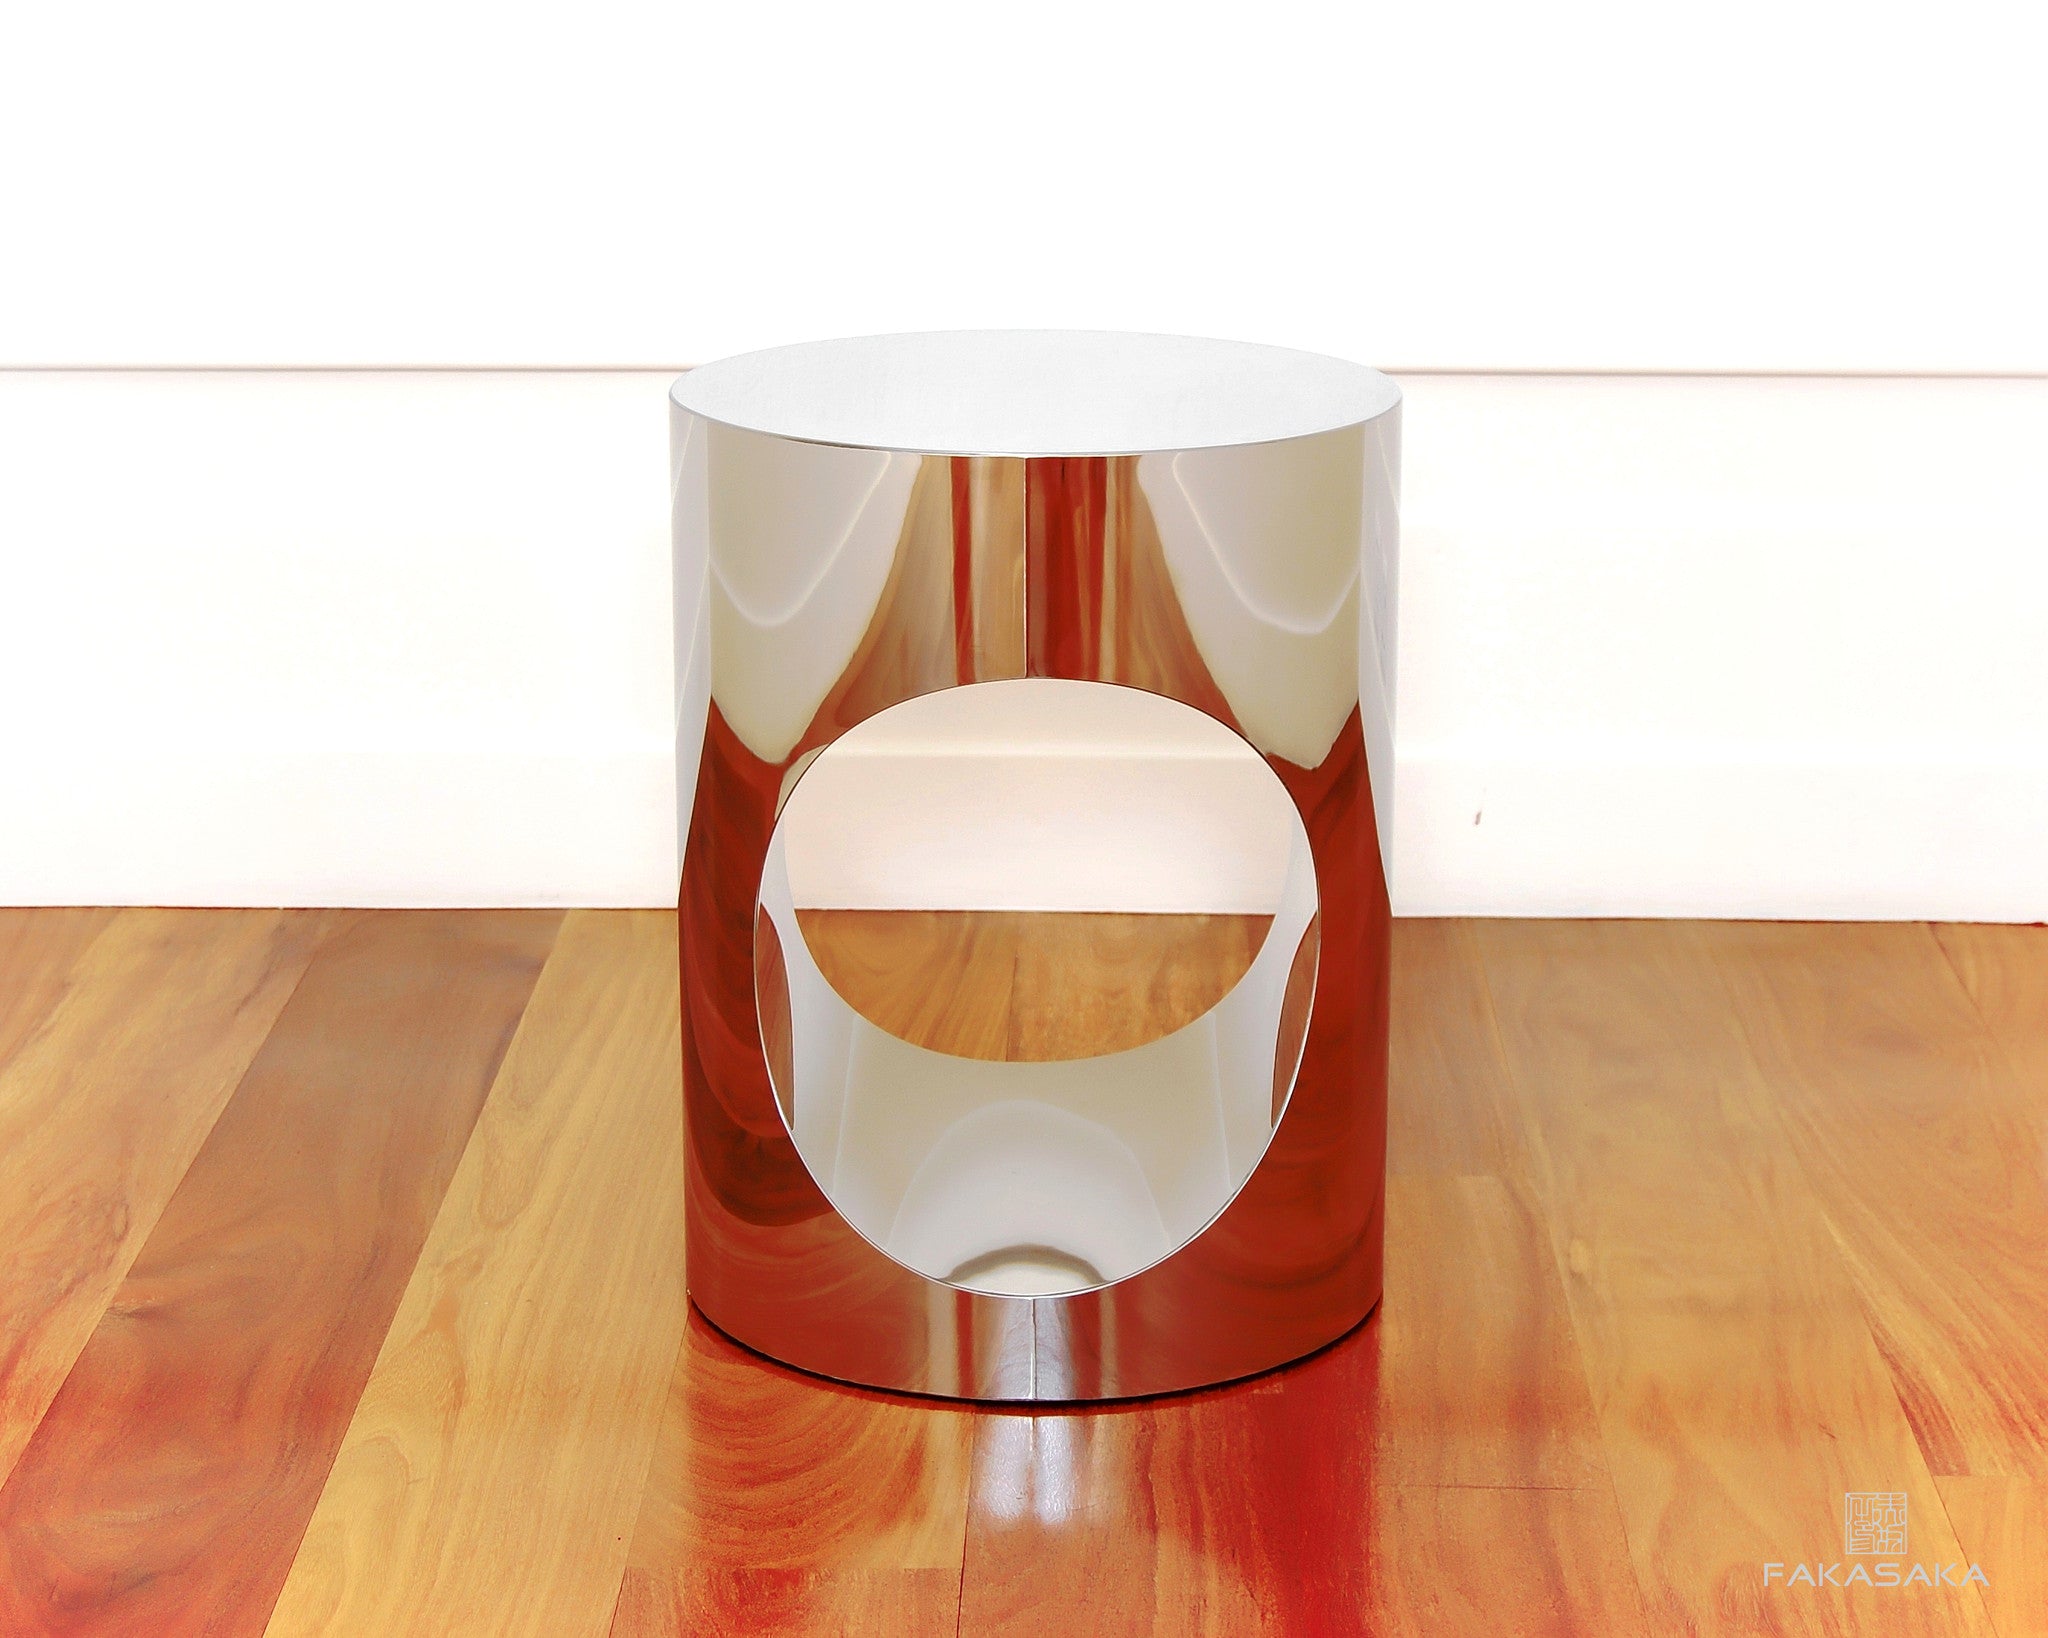 FA4<br><br>STOOL / SIDE TABLE / DRINK TABLE<br><br>STAINLESS STEEL